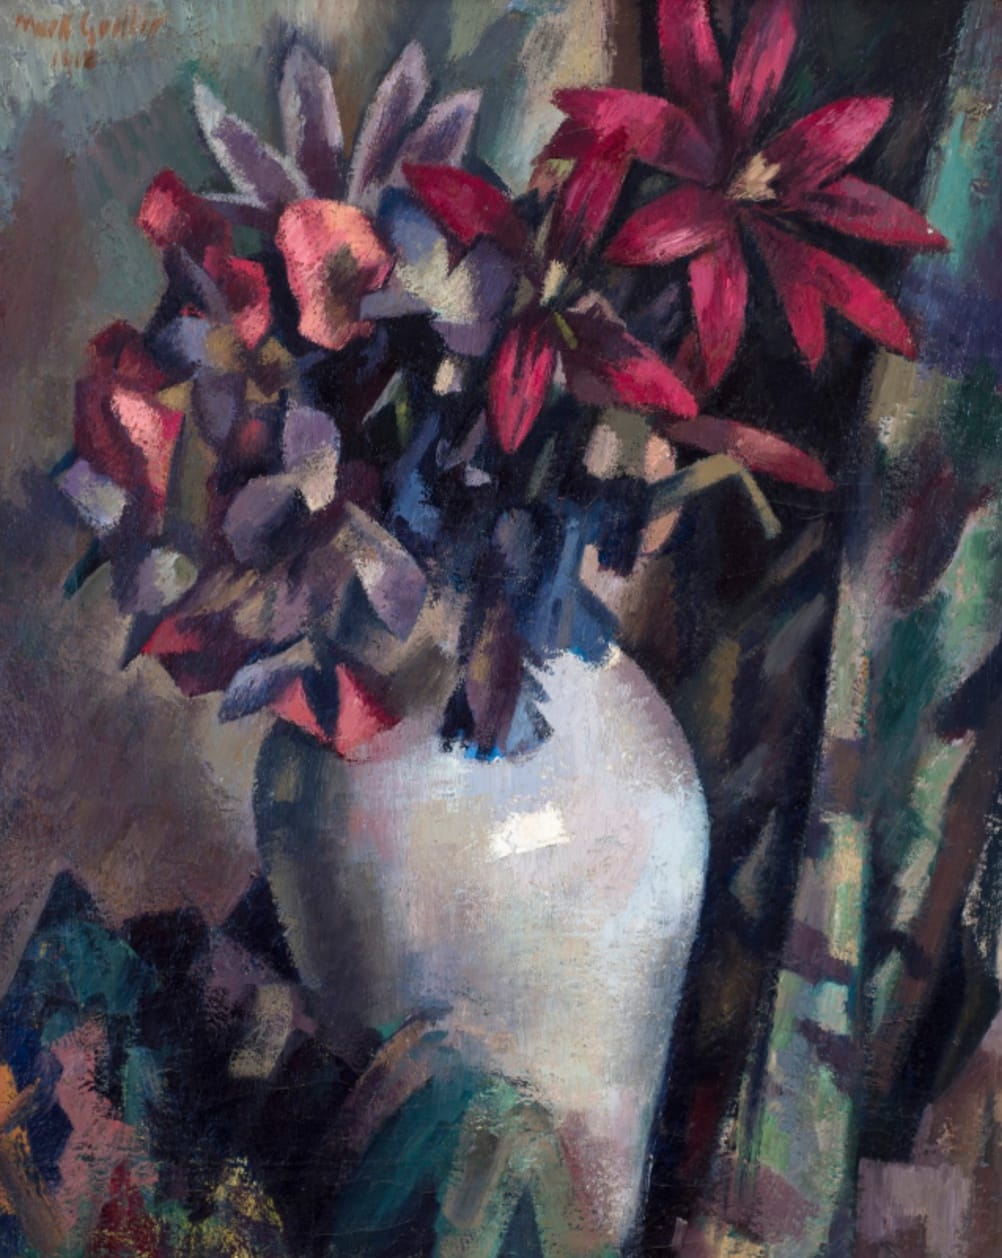 Mark Gertler (1891-1939) Flowers in a Vase 1918 Oil on canvas 68.5 x 55.8 cm Private Collection To see and discover more about this artist click here